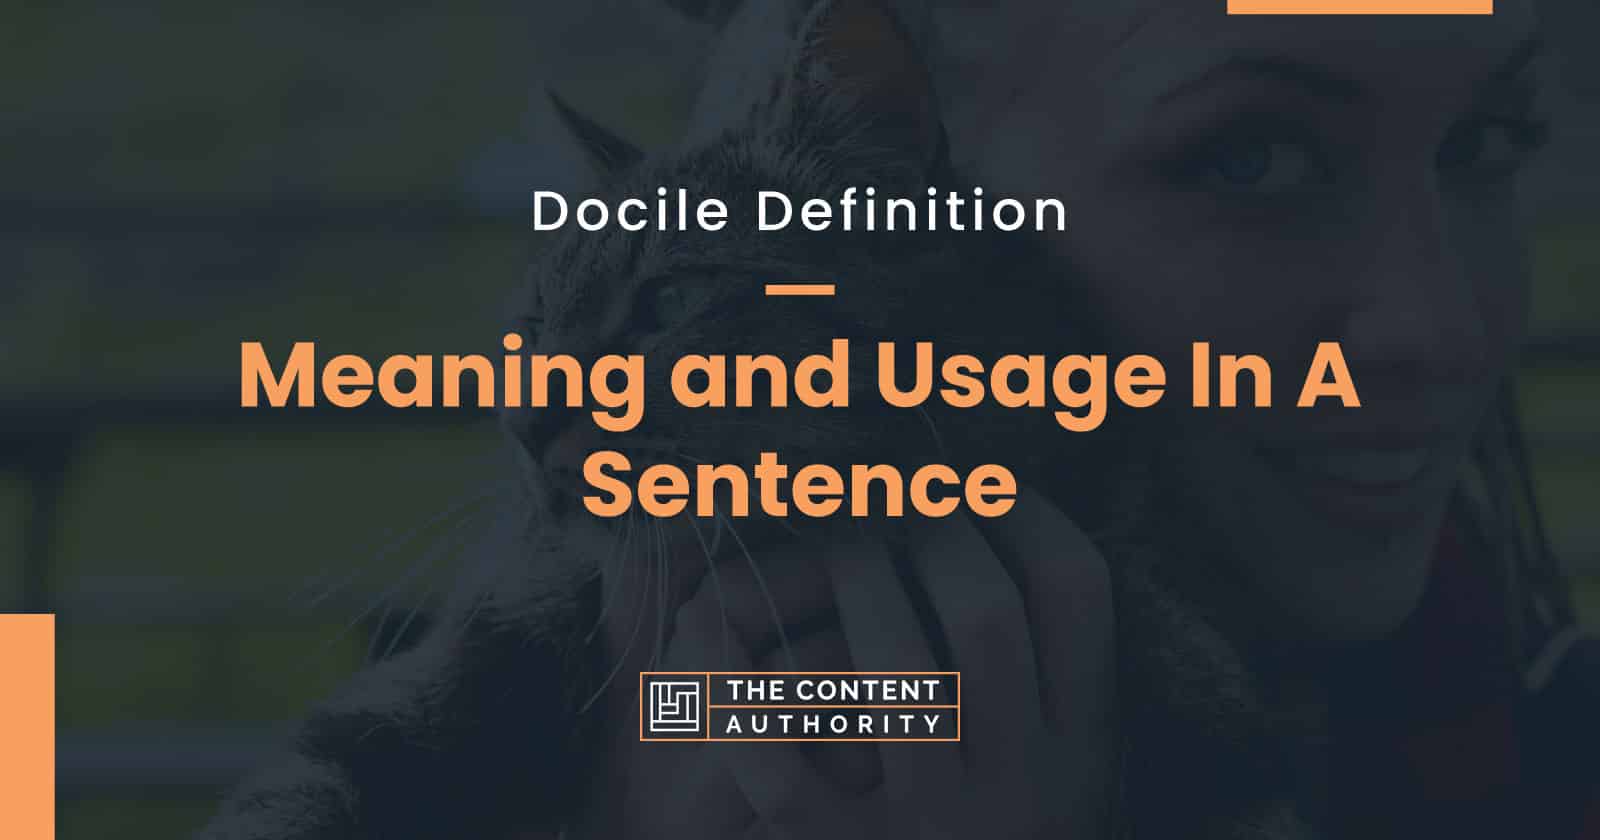 Docile Definition – Meaning and Usage In A Sentence